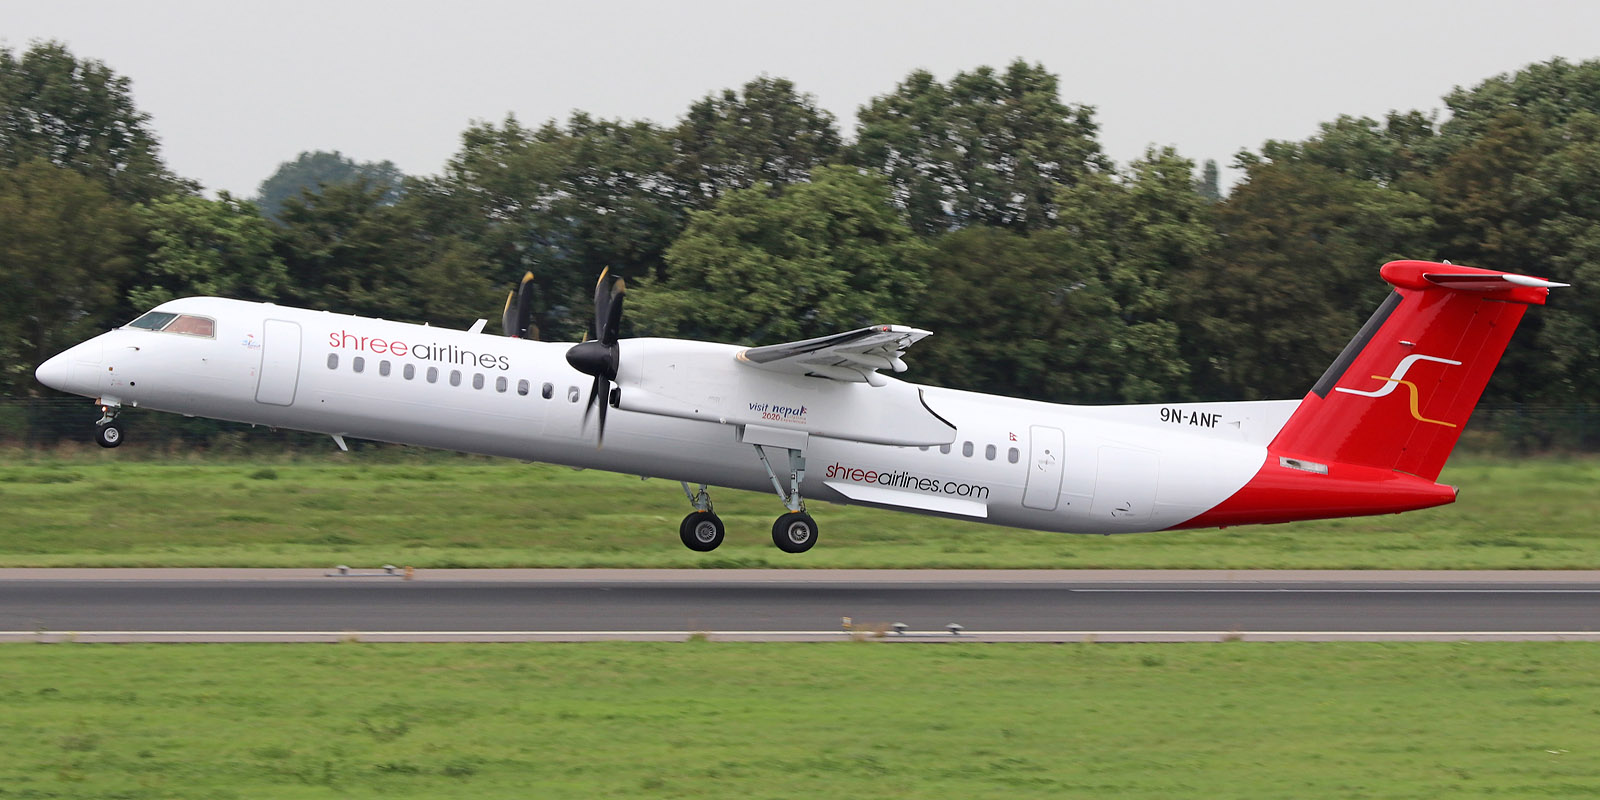 Shree Airlines add two Dash 8s to its fleet